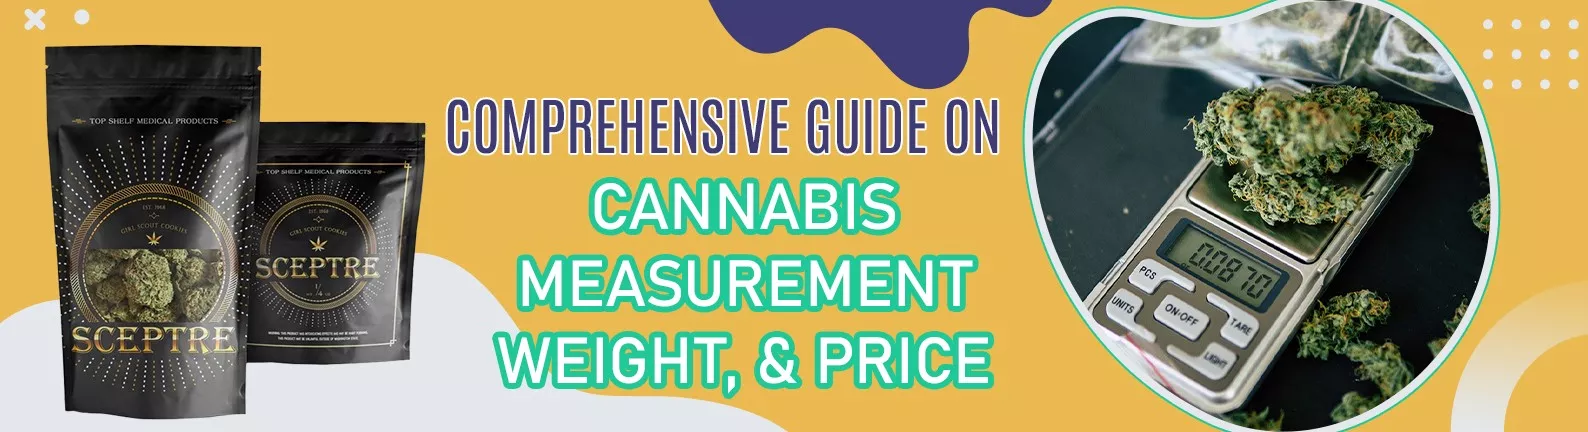 Comprehensive-Guide-On-Cannabis-Measurement,-Weight,Price etc